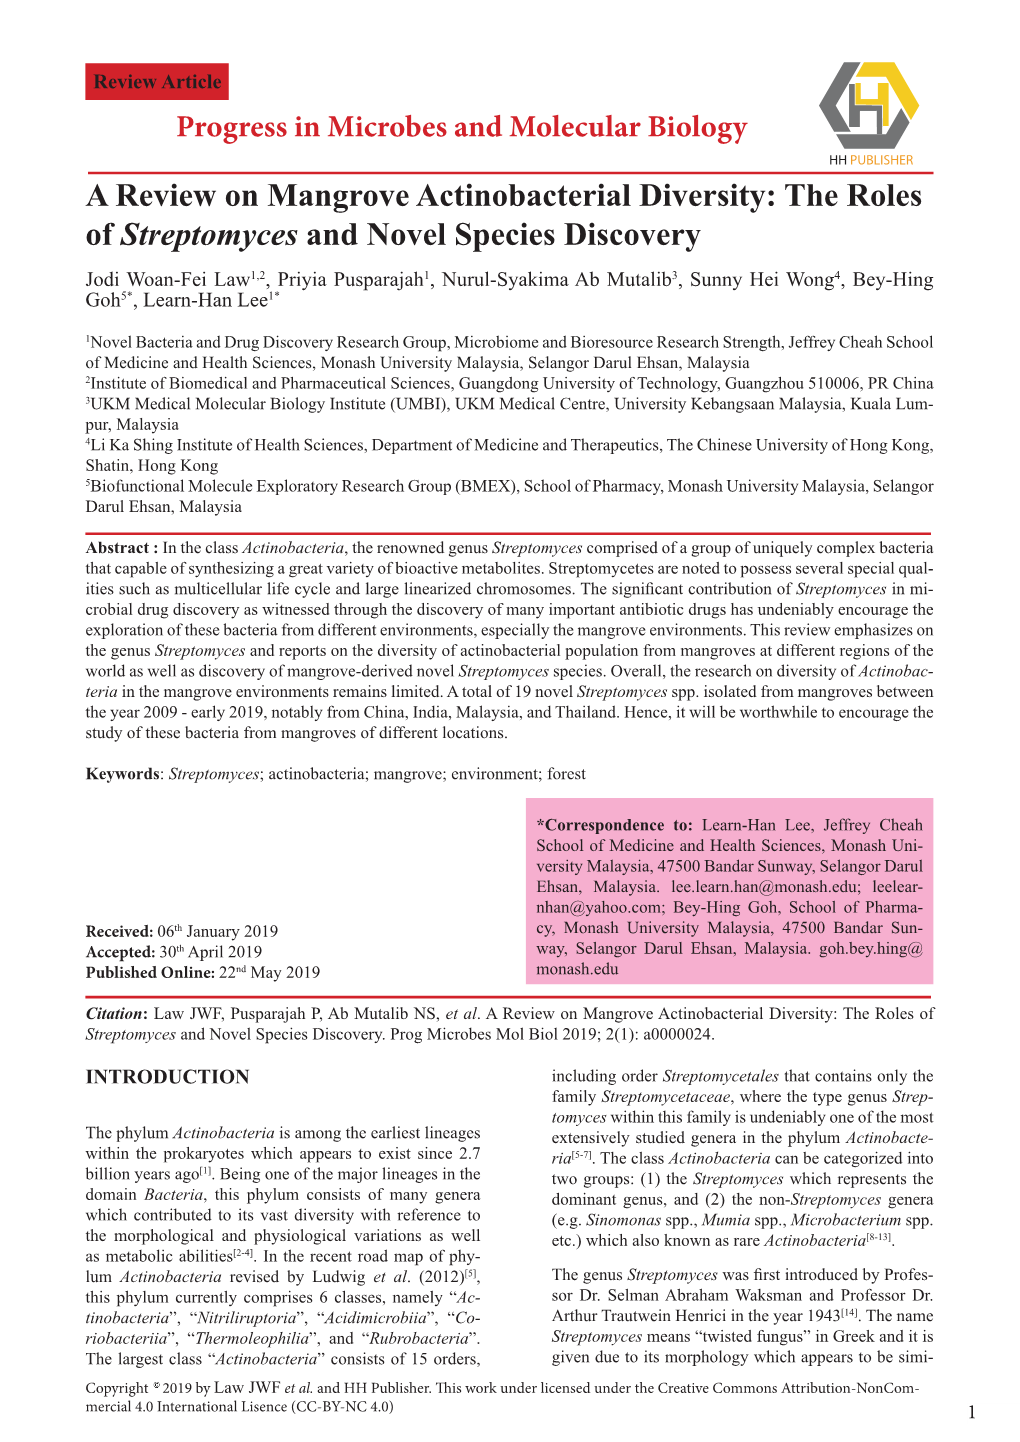 The Roles of Streptomyces and Novel Species Discovery